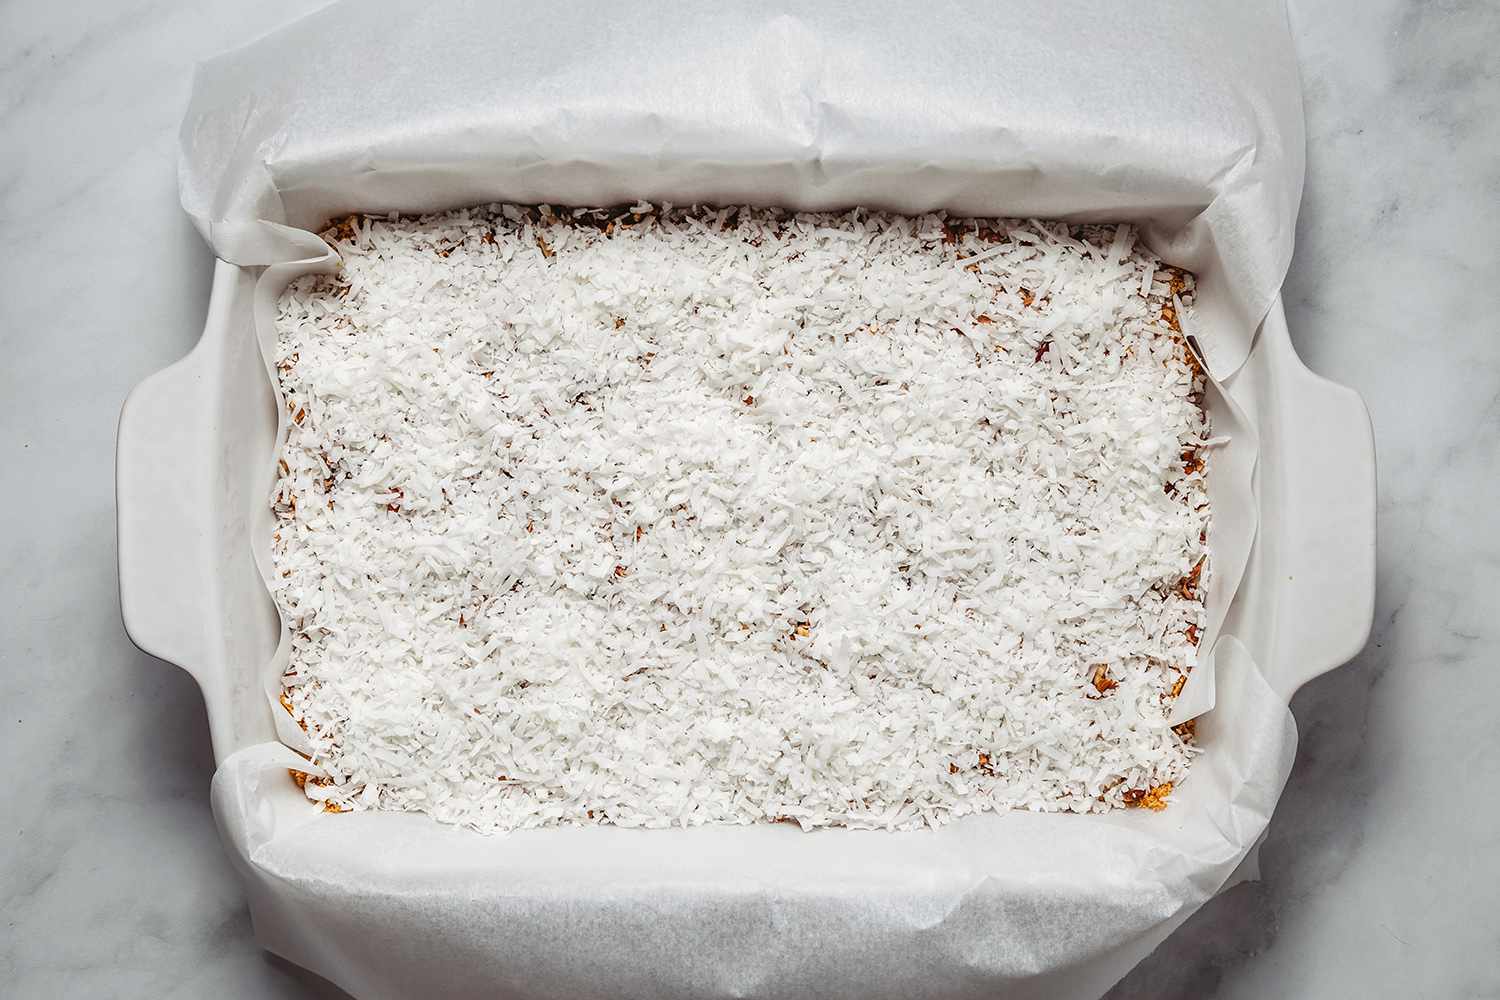 Coconut flakes on top of the chocolate and nut mixture in the prepared baking pan